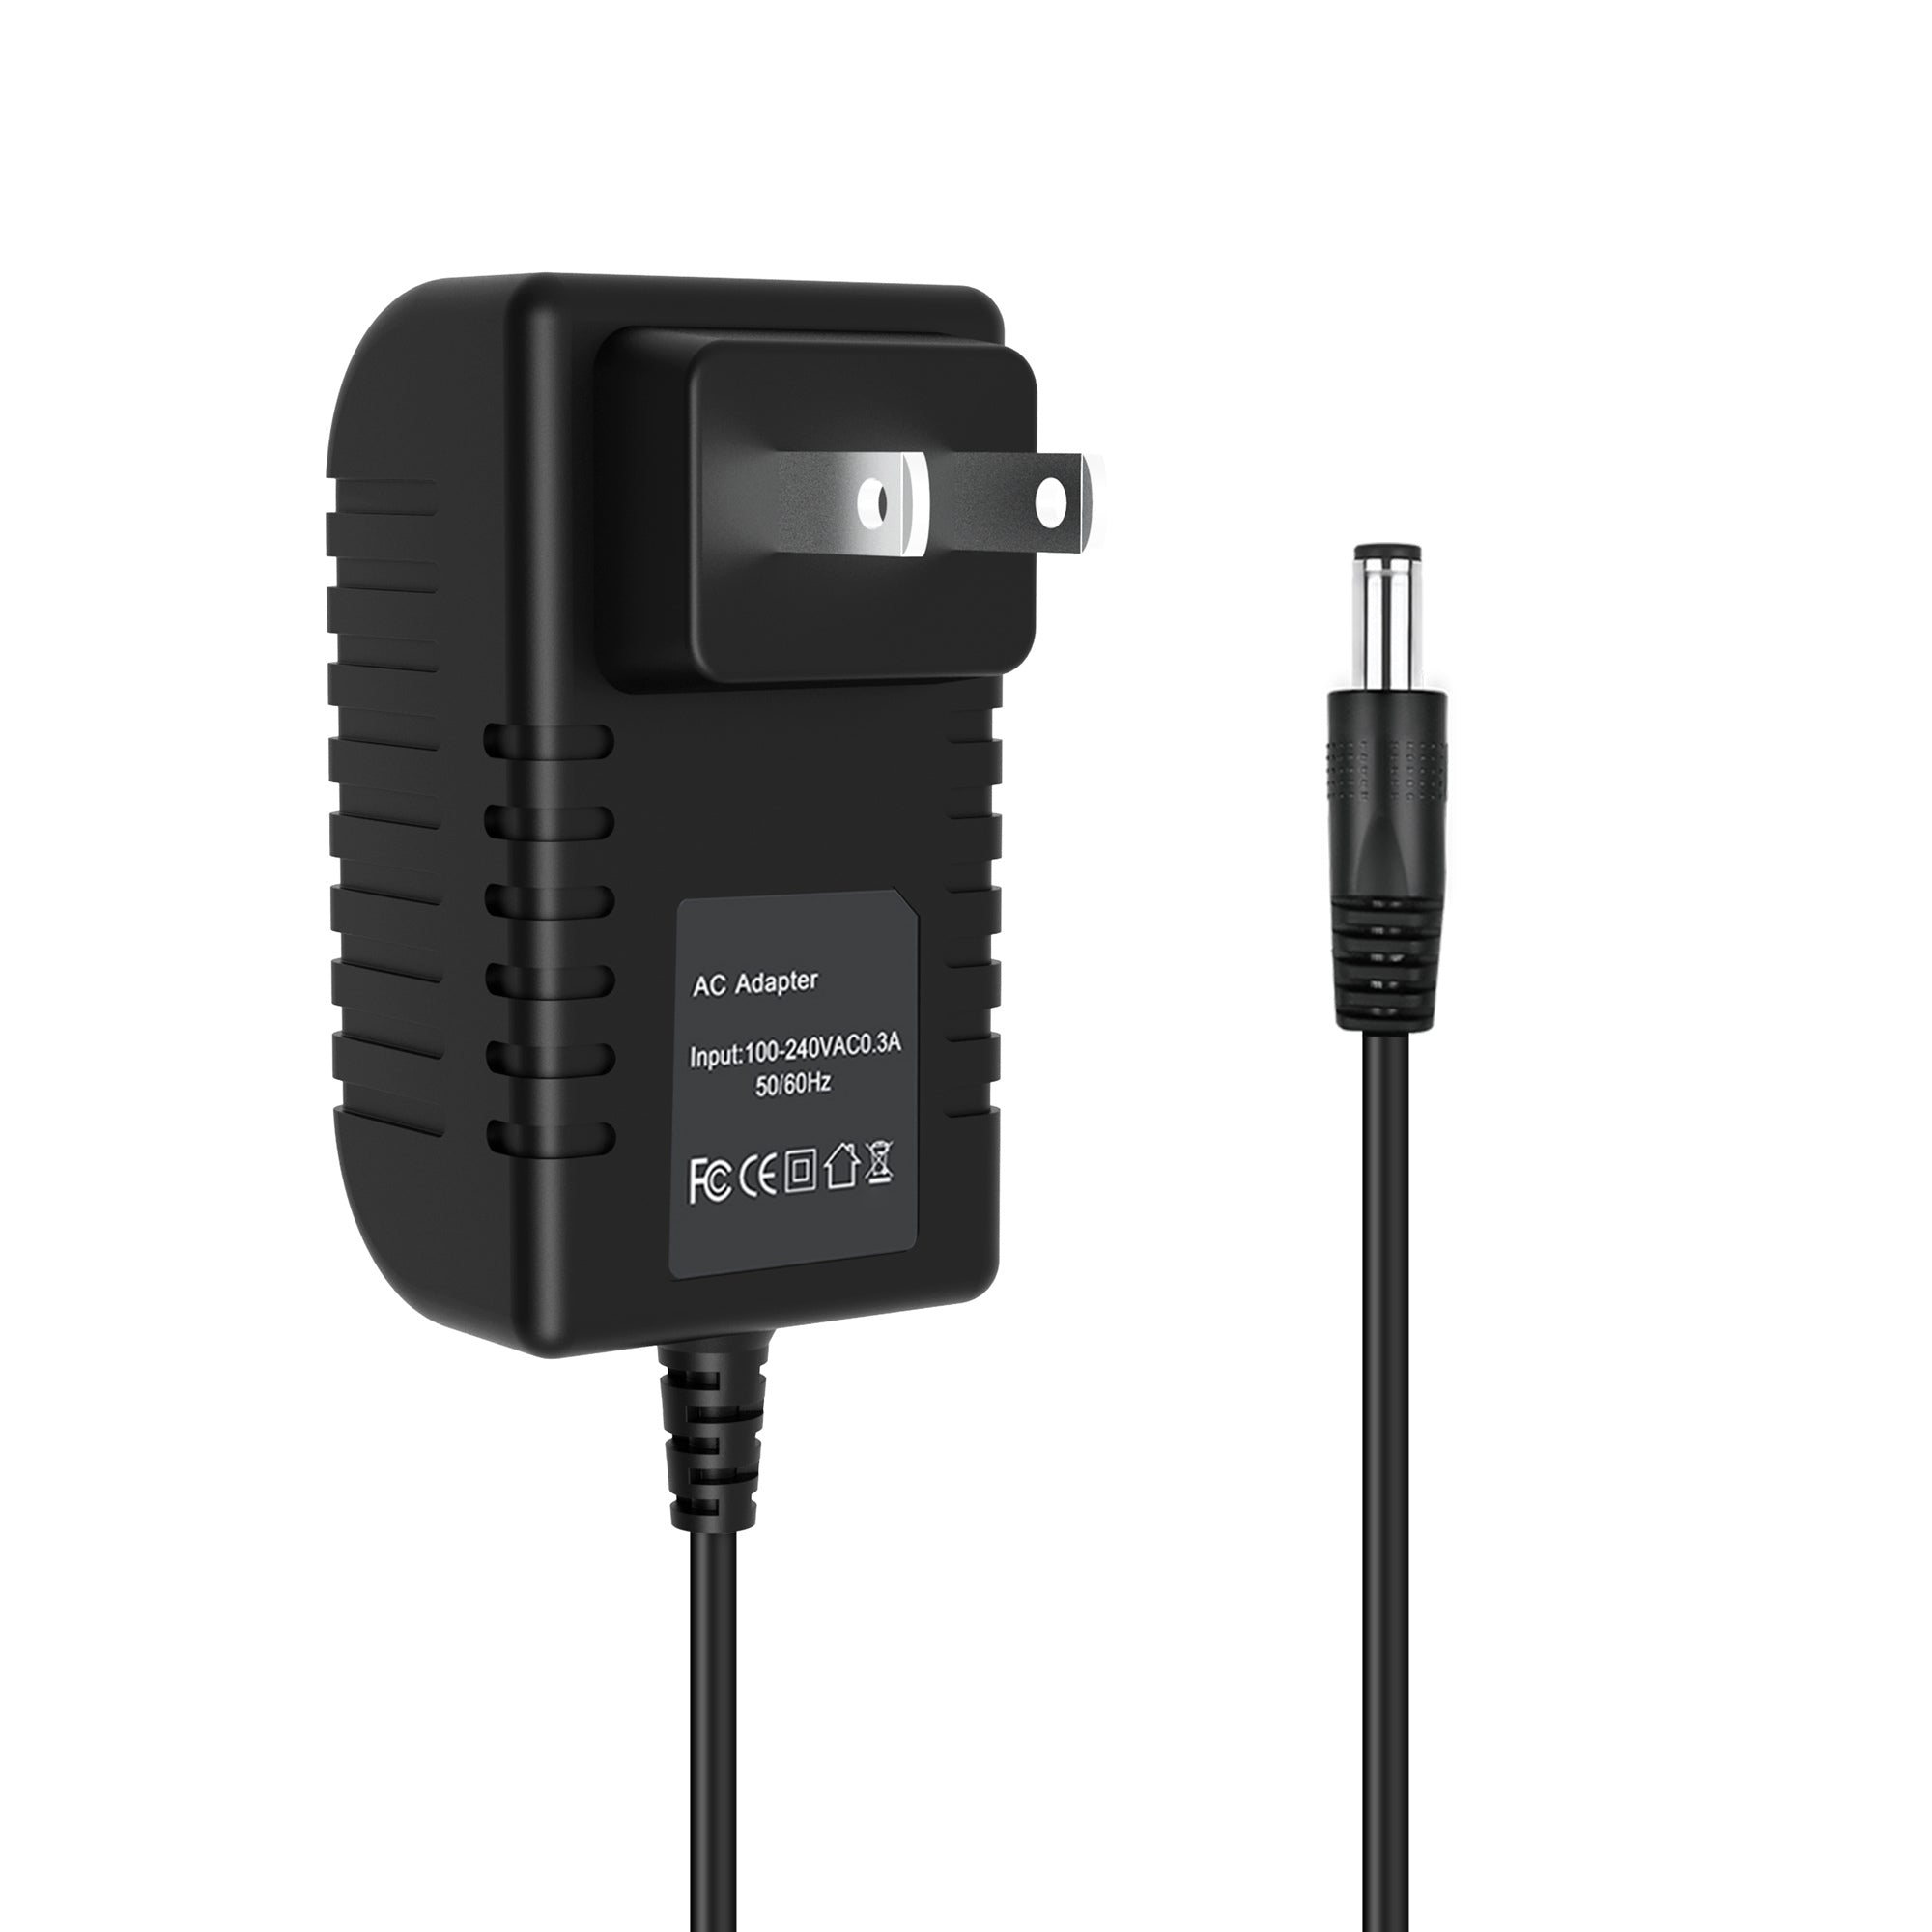 AbleGrid AC/DC Adapter Compatible with HONOR Model: ADS-12B-06 06009G ADS-12B-0606009G I.T.E Power Supply Cord Cable PS Wall Home Charger Input: 100 - 240 VAC Worldwide Use Mains PSU